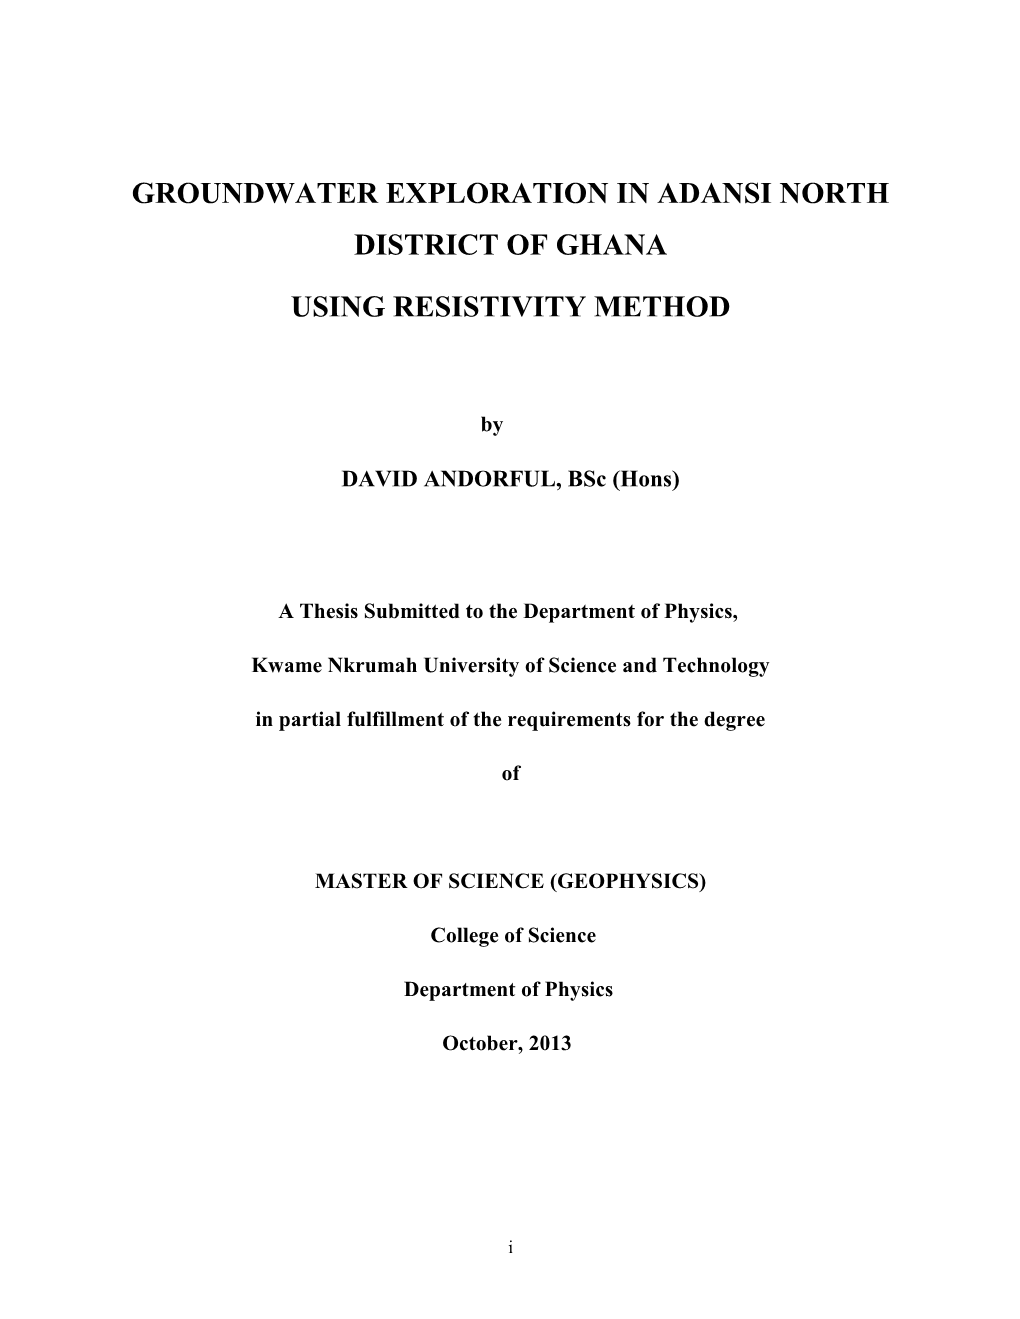 Groundwater Exploration in Adansi North District of Ghana